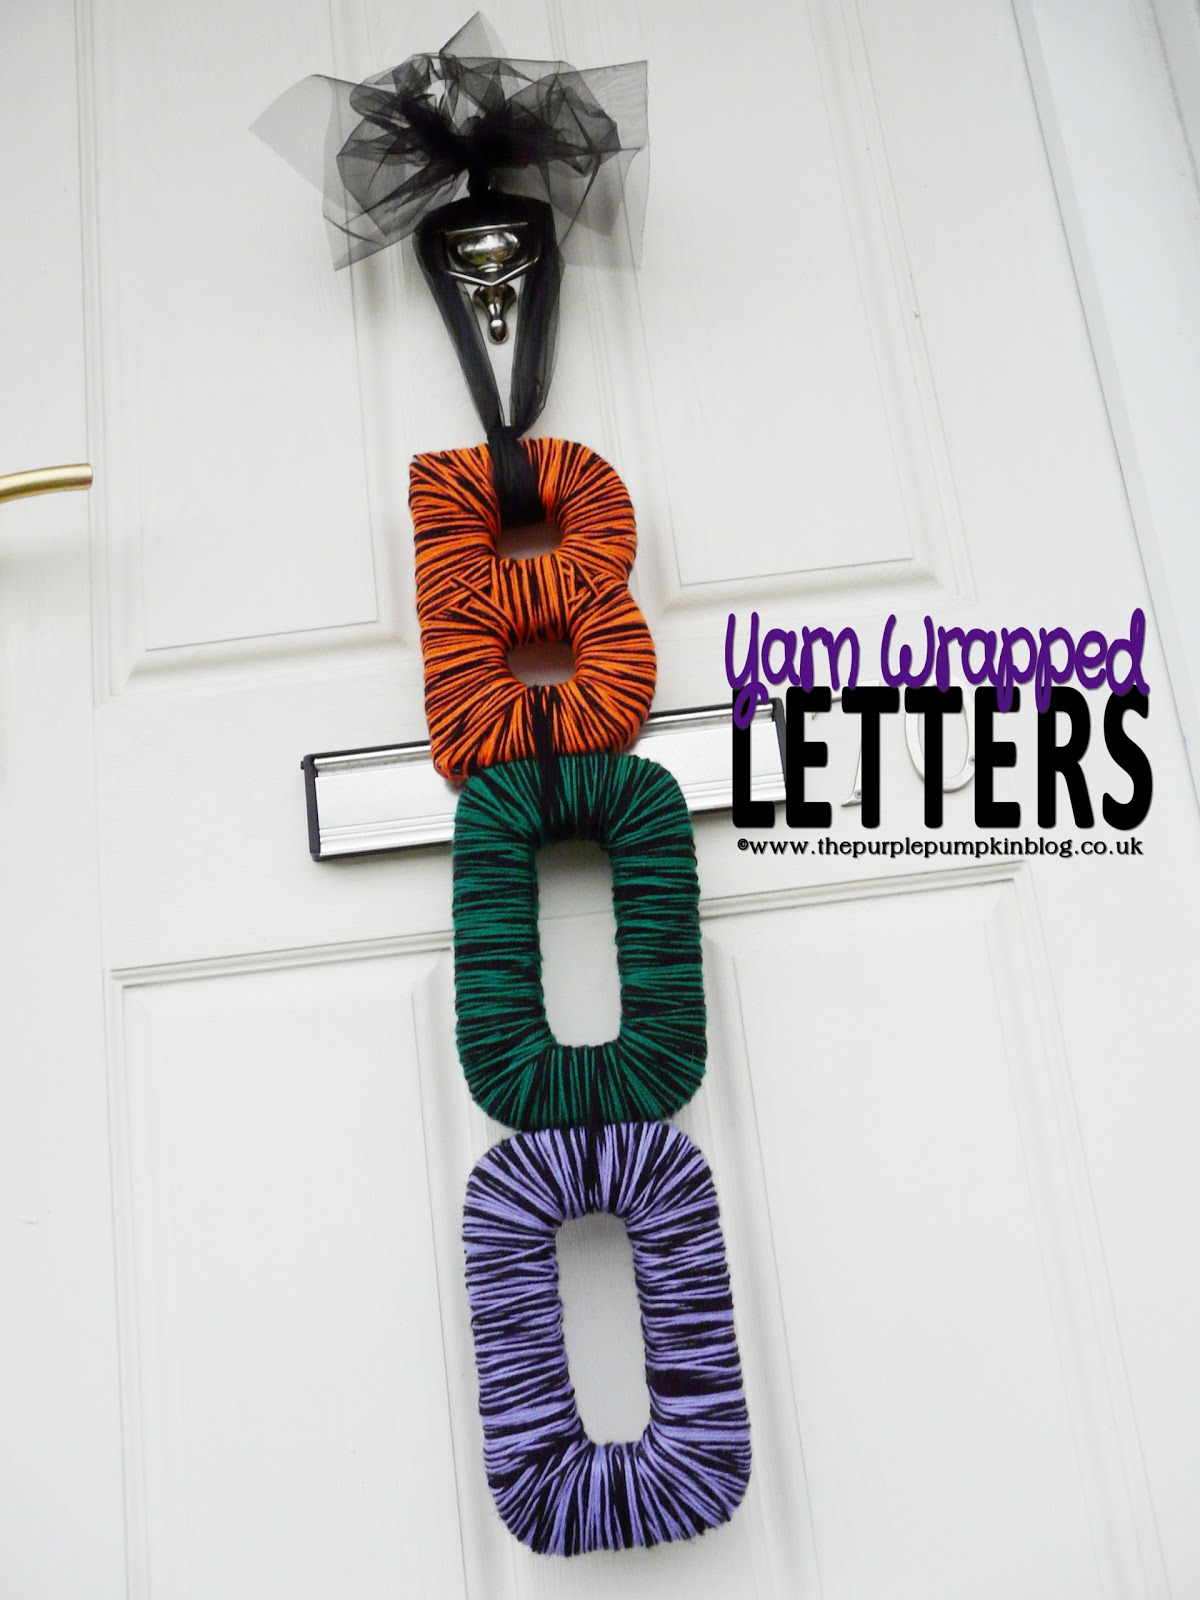 BOO! Yarn Wrapped Letters Halloween Decoration